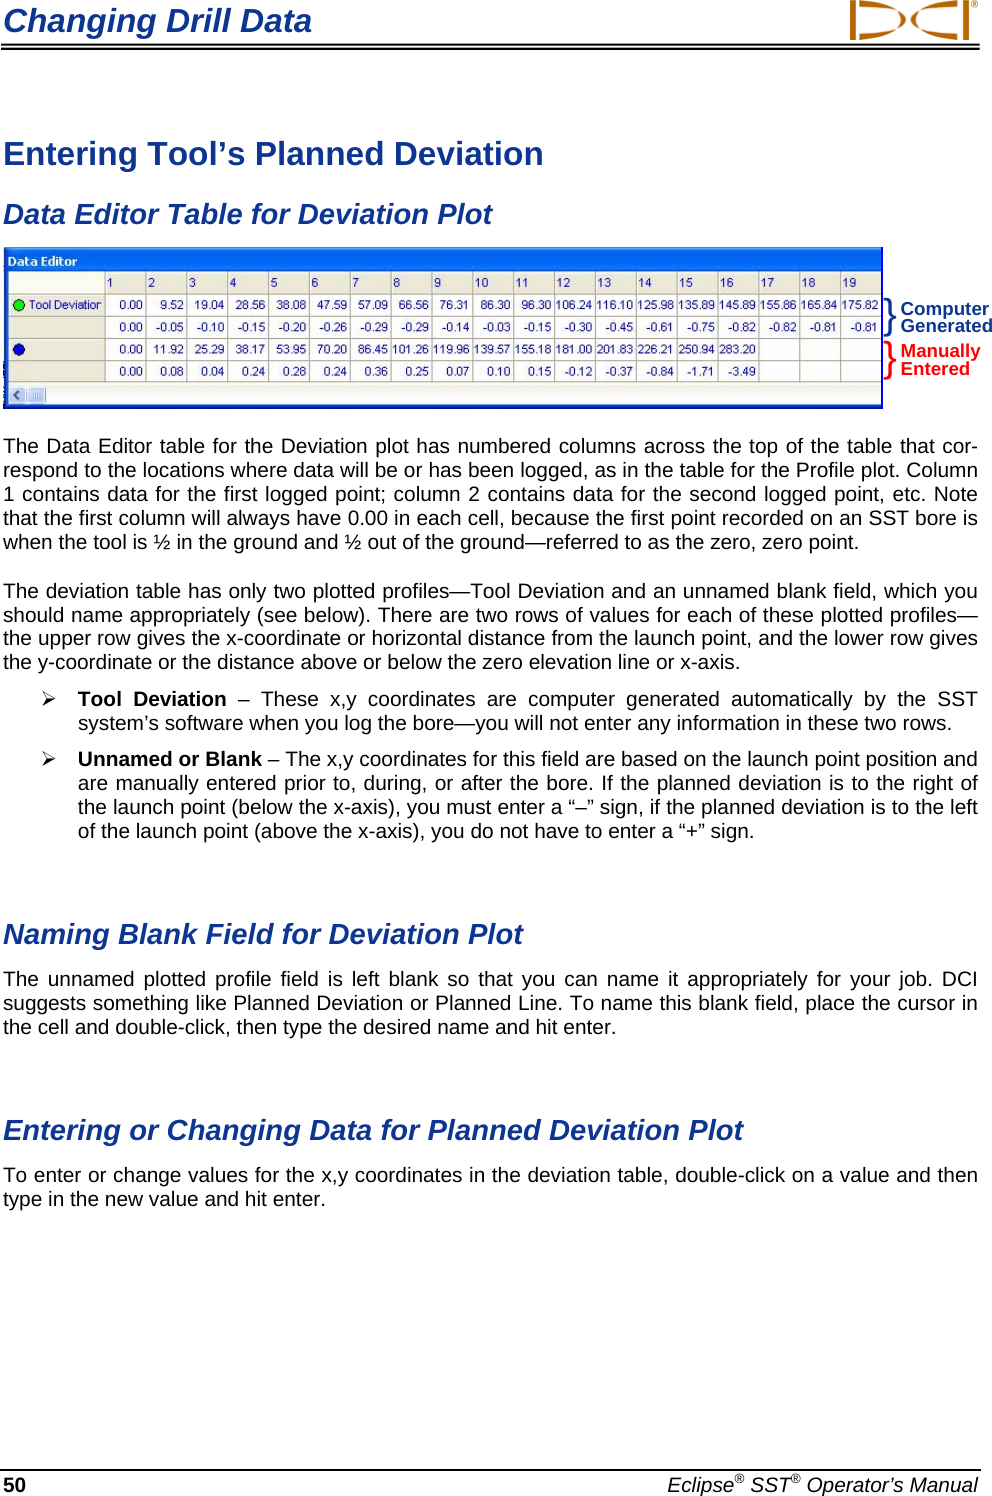 Changing Drill Data  Entering Tool’s Planned Deviation Data Editor Table for Deviation Plot  }}Computer Generated Manually Entered The Data Editor table for the Deviation plot has numbered columns across the top of the table that cor-respond to the locations where data will be or has been logged, as in the table for the Profile plot. Column 1 contains data for the first logged point; column 2 contains data for the second logged point, etc. Note that the first column will always have 0.00 in each cell, because the first point recorded on an SST bore is when the tool is ½ in the ground and ½ out of the ground—referred to as the zero, zero point. The deviation table has only two plotted profiles—Tool Deviation and an unnamed blank field, which you should name appropriately (see below). There are two rows of values for each of these plotted profiles—the upper row gives the x-coordinate or horizontal distance from the launch point, and the lower row gives the y-coordinate or the distance above or below the zero elevation line or x-axis. ¾ Tool Deviation – These x,y coordinates are computer generated automatically by the SST system’s software when you log the bore—you will not enter any information in these two rows.   ¾ Unnamed or Blank – The x,y coordinates for this field are based on the launch point position and are manually entered prior to, during, or after the bore. If the planned deviation is to the right of the launch point (below the x-axis), you must enter a “–” sign, if the planned deviation is to the left of the launch point (above the x-axis), you do not have to enter a “+” sign.    Naming Blank Field for Deviation Plot The unnamed plotted profile field is left blank so that you can name it appropriately for your job. DCI suggests something like Planned Deviation or Planned Line. To name this blank field, place the cursor in the cell and double-click, then type the desired name and hit enter.    Entering or Changing Data for Planned Deviation Plot To enter or change values for the x,y coordinates in the deviation table, double-click on a value and then type in the new value and hit enter.  50  Eclipse® SST® Operator’s Manual 